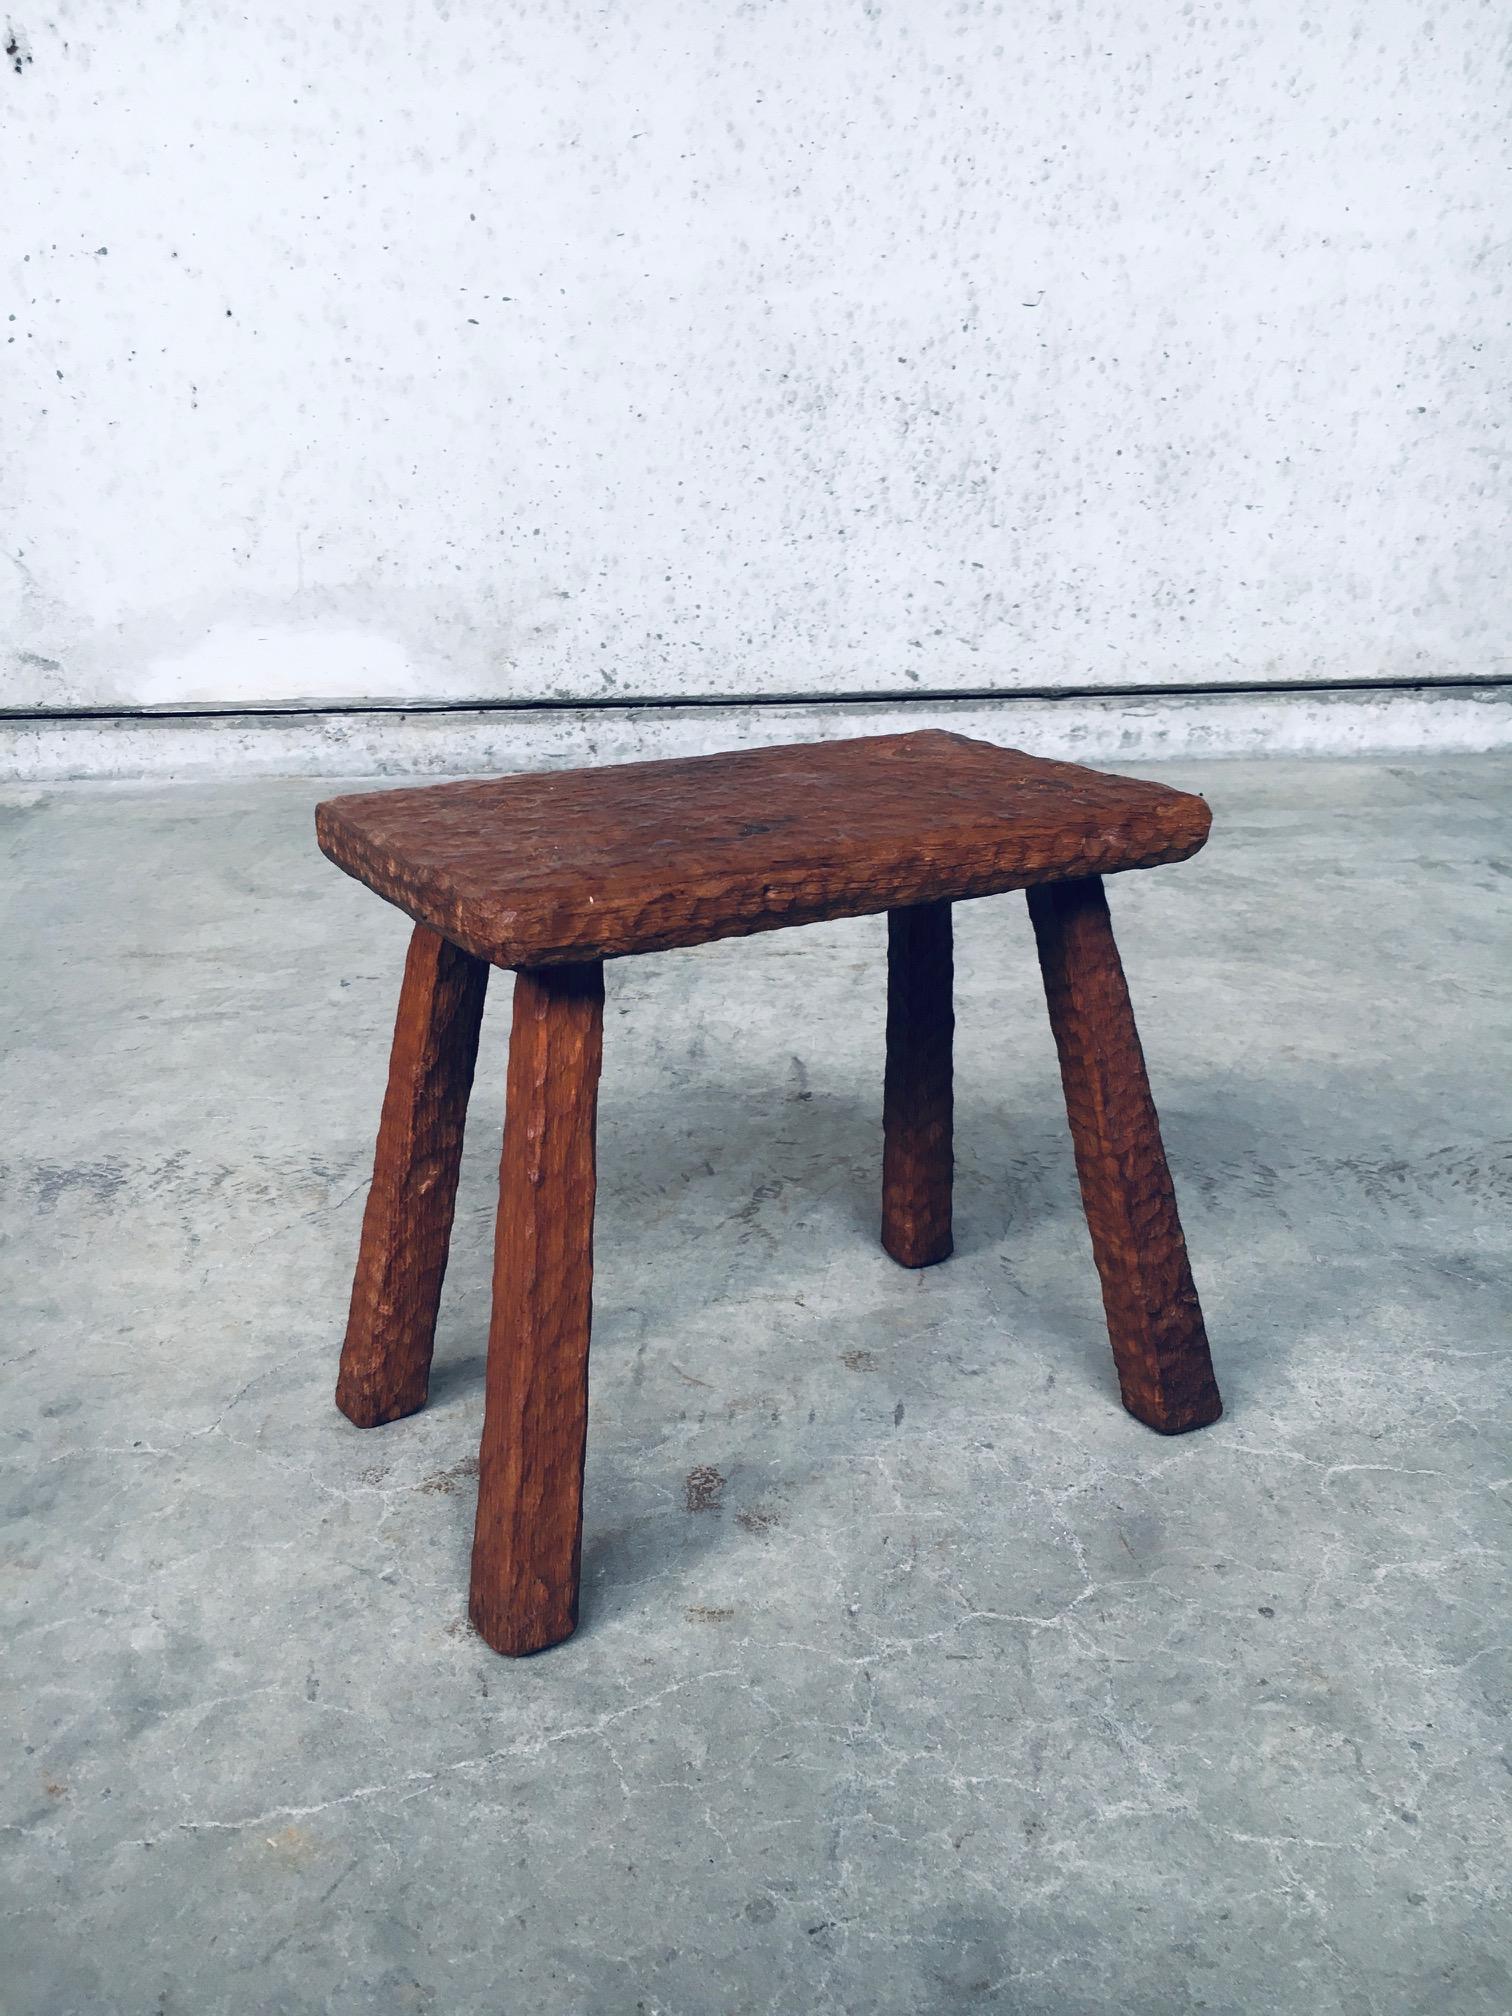 Original Hand Crafted Artisan Made Carved Solid Oak Low Stool or Side Table. Made in Belgium, early 20th Century. Solid oak construction with overal carving, on the top and the legs, which gives this a very nice finish. All original and in good